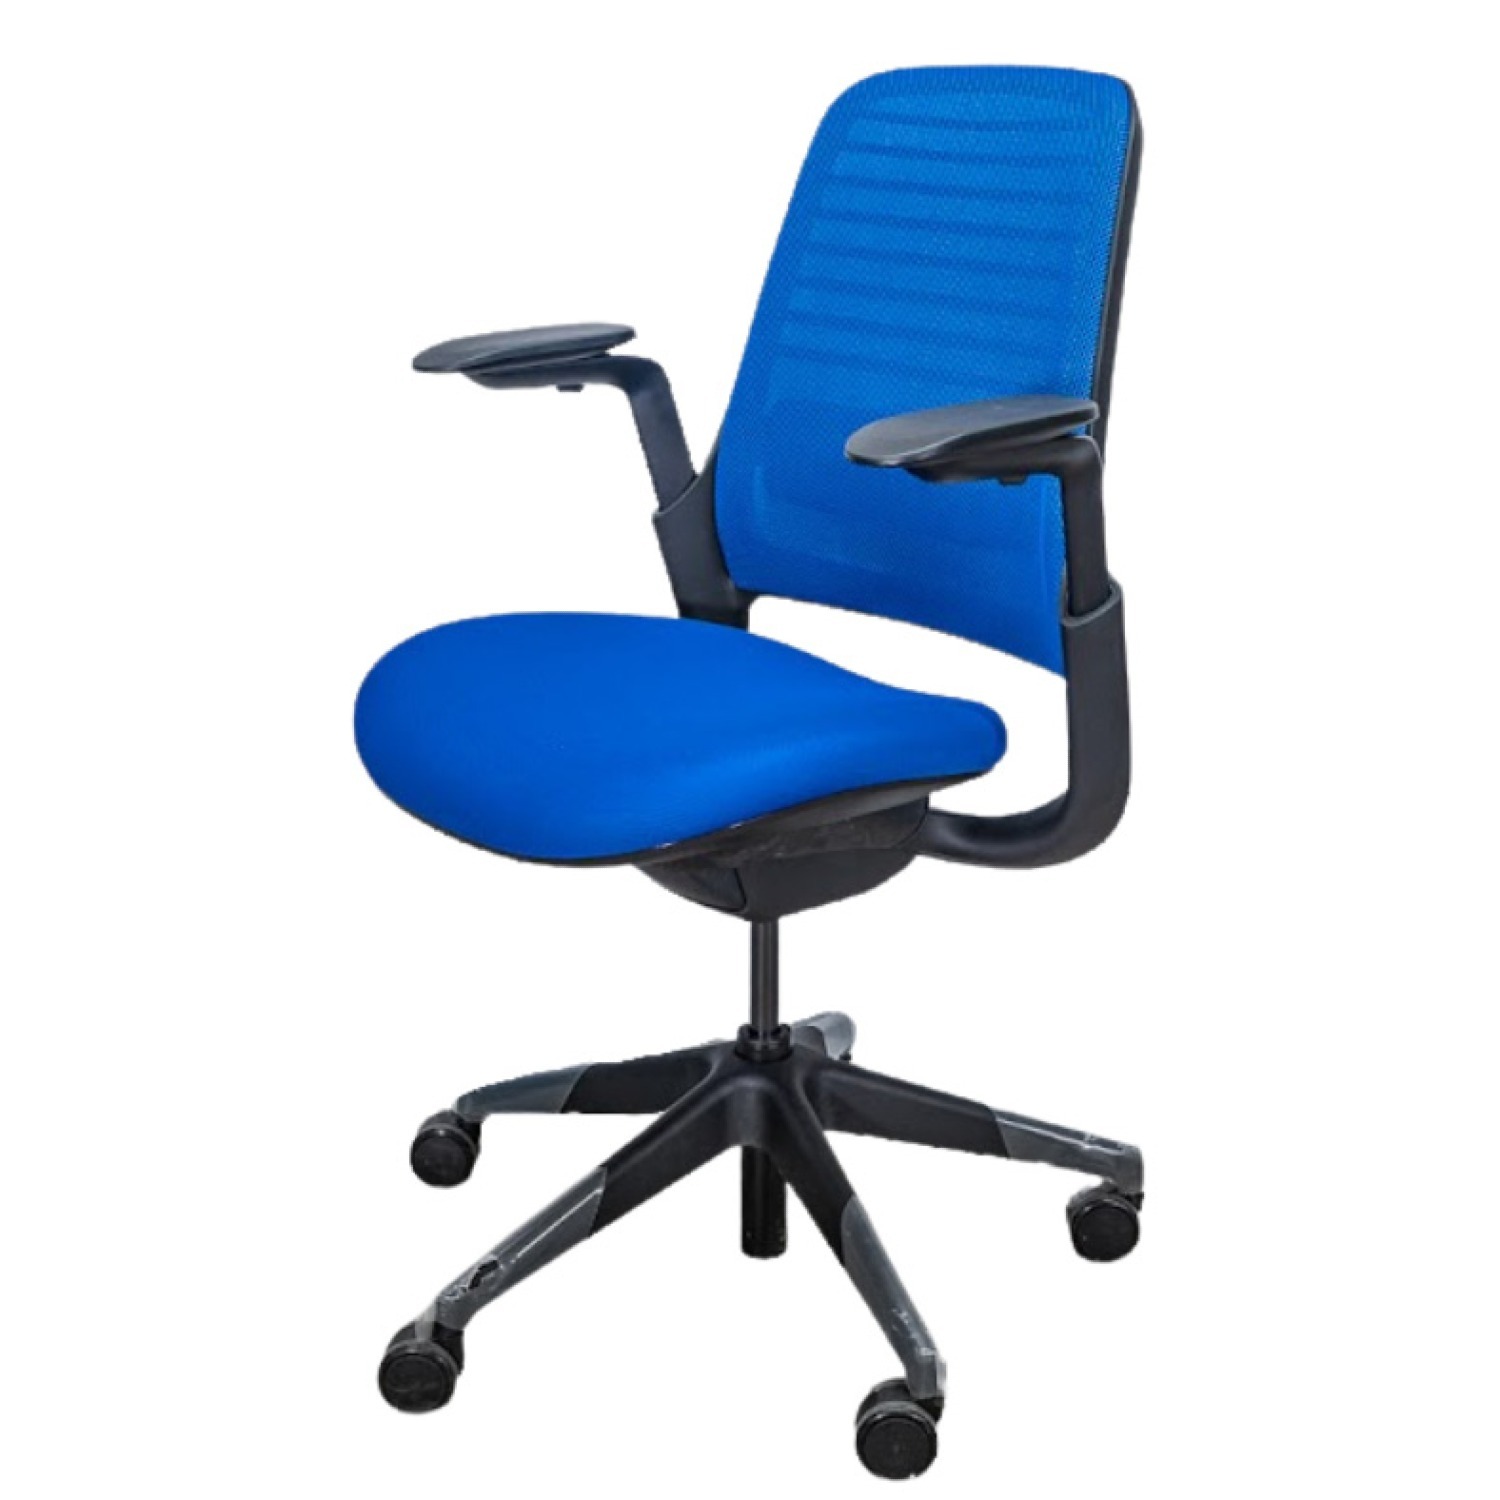 Crandall Office Furniture: 20% Off Steelcase Authorized Factory Returned  Chairs: Steelcase Series 2 Chairs & more + Free Shipping